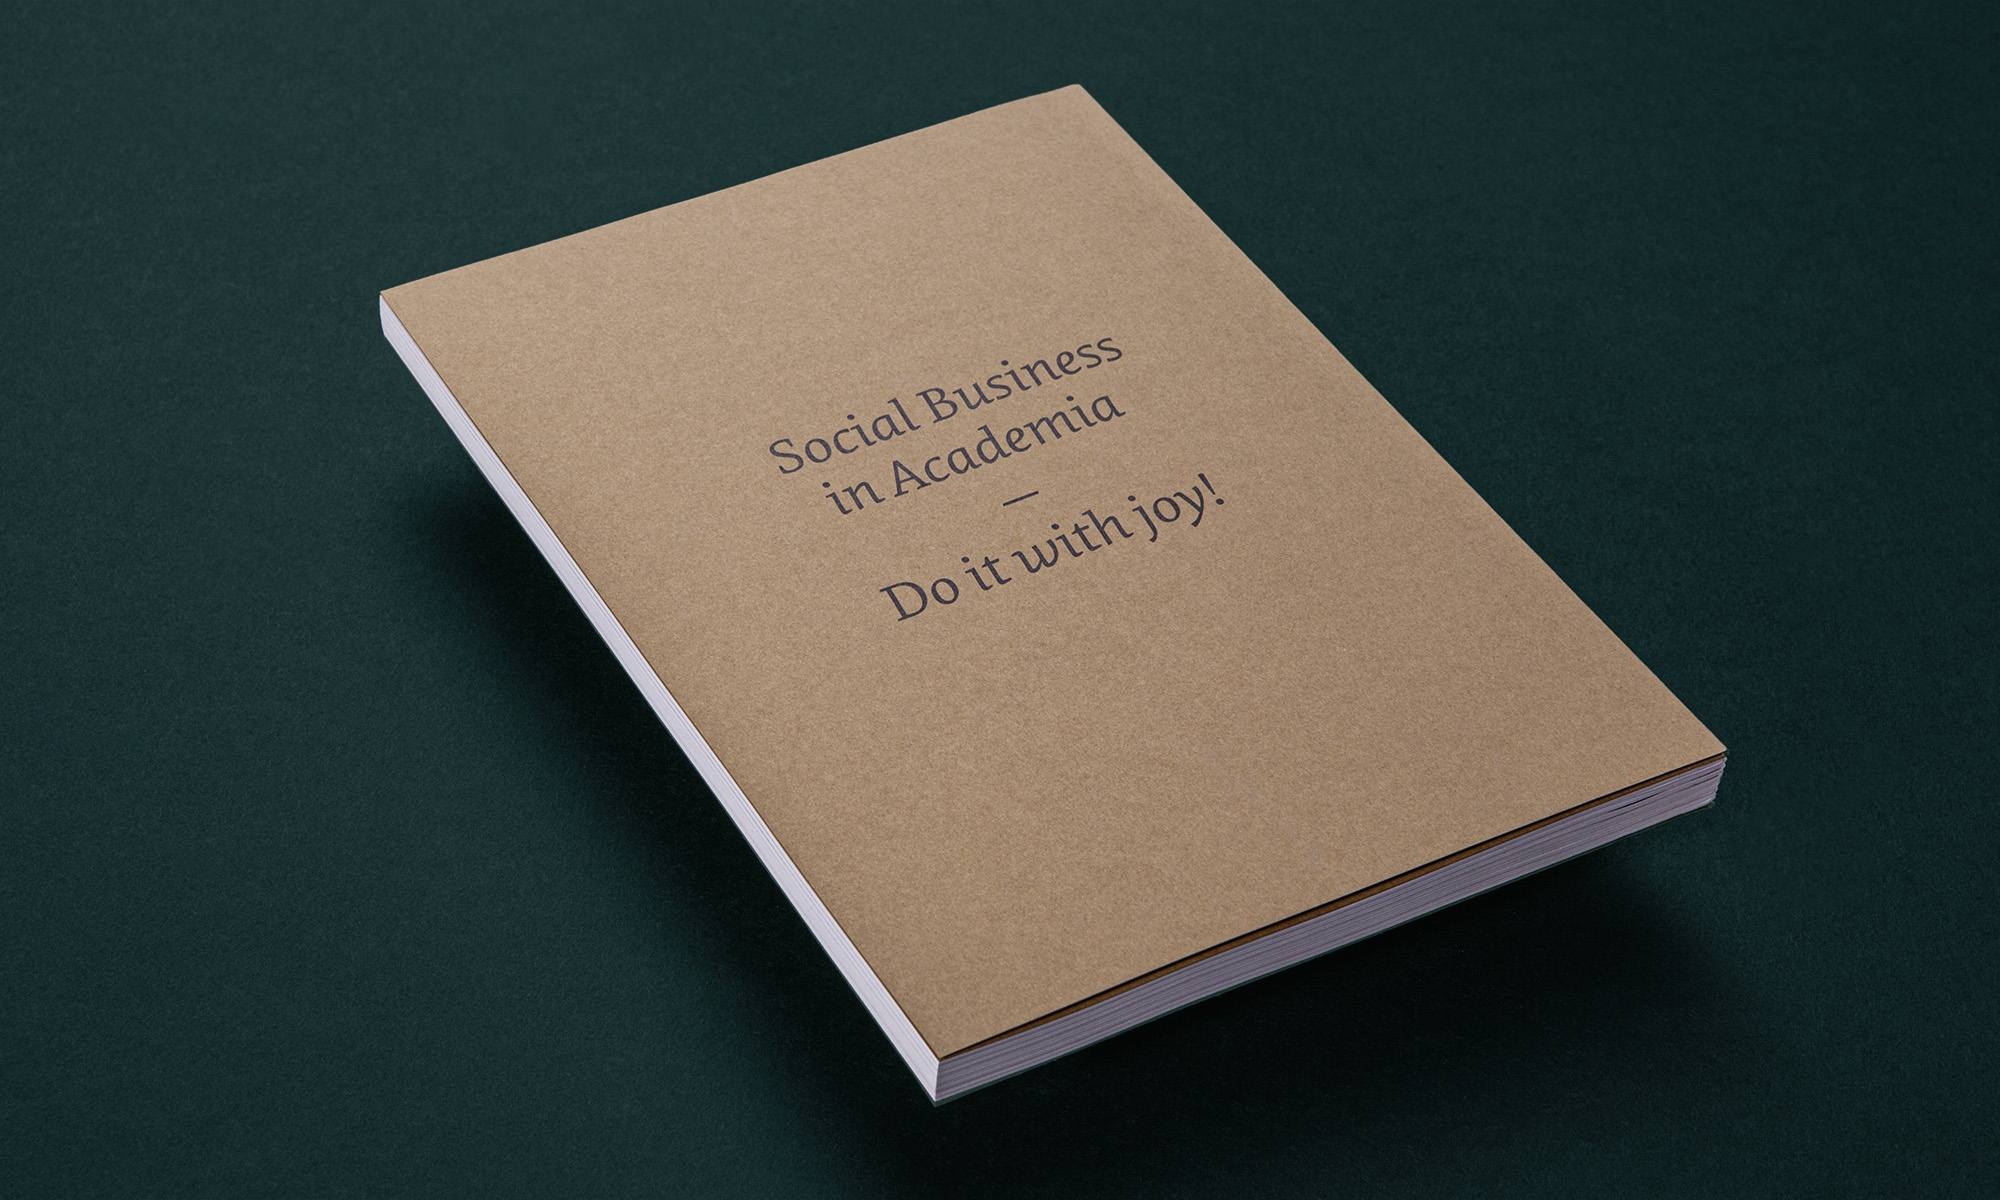 Academia Report on social business 2019 by hesh. design